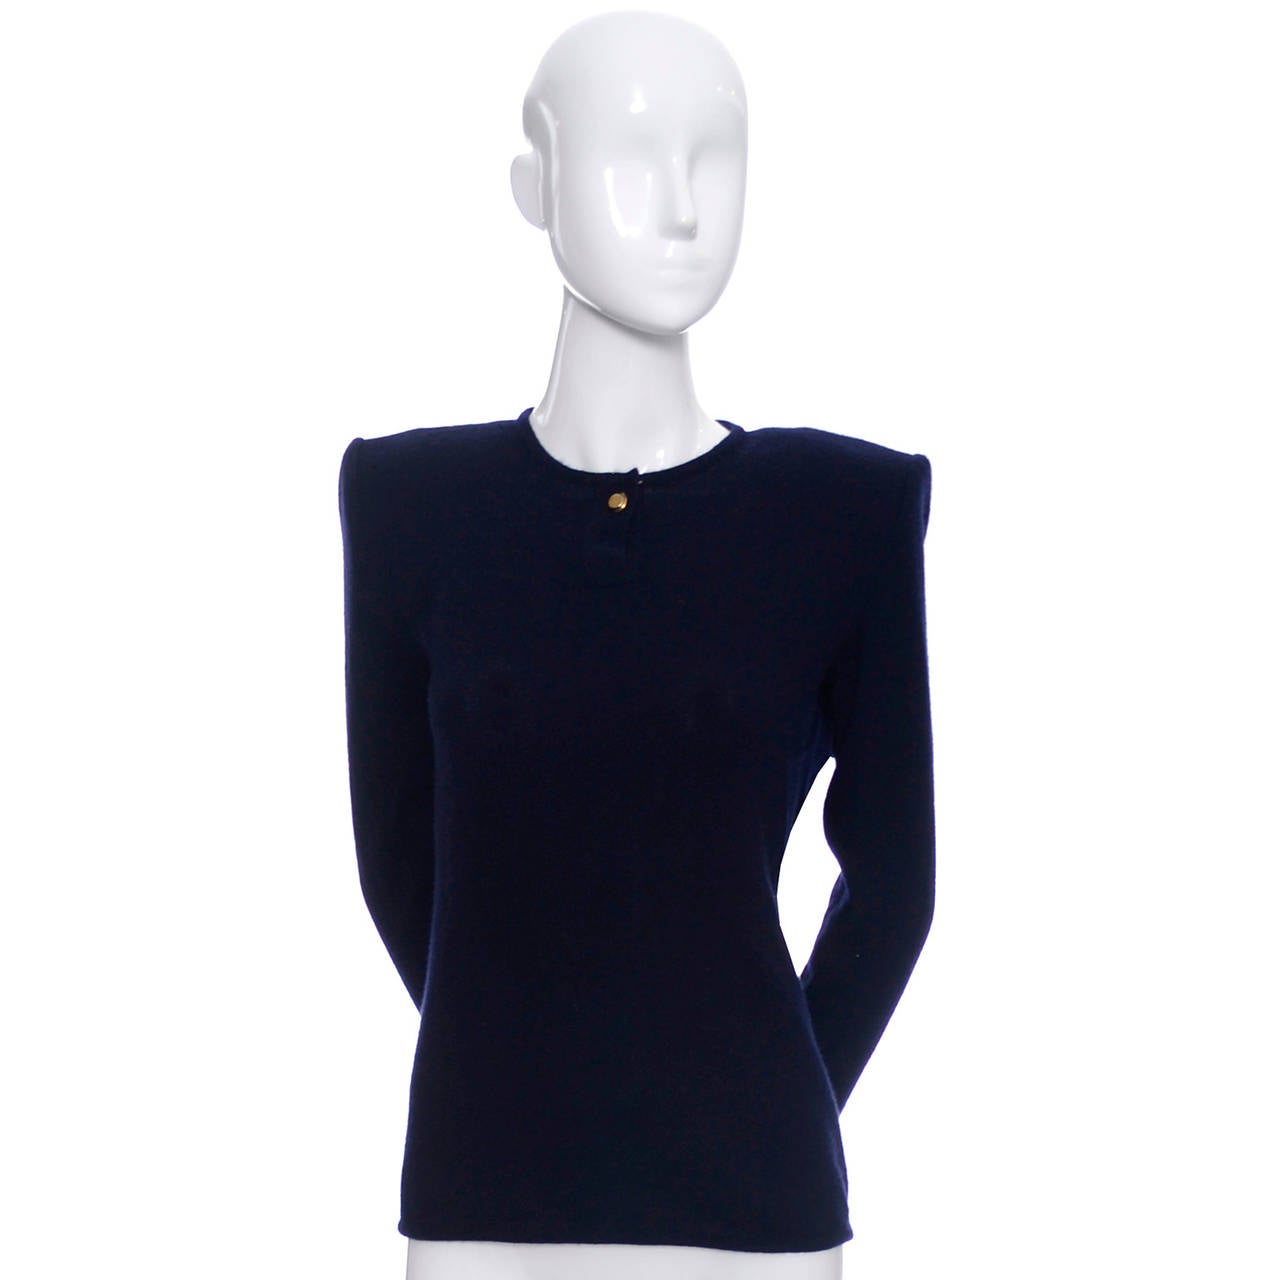 This is a beautiful Valentino Boutique vintage cashmere navy blue sweater with shoulder pads and a single brass button. The sweater is in as new condition and is a wonderful, classic piece to own for years to come.  Made in Italy in the early 1980's